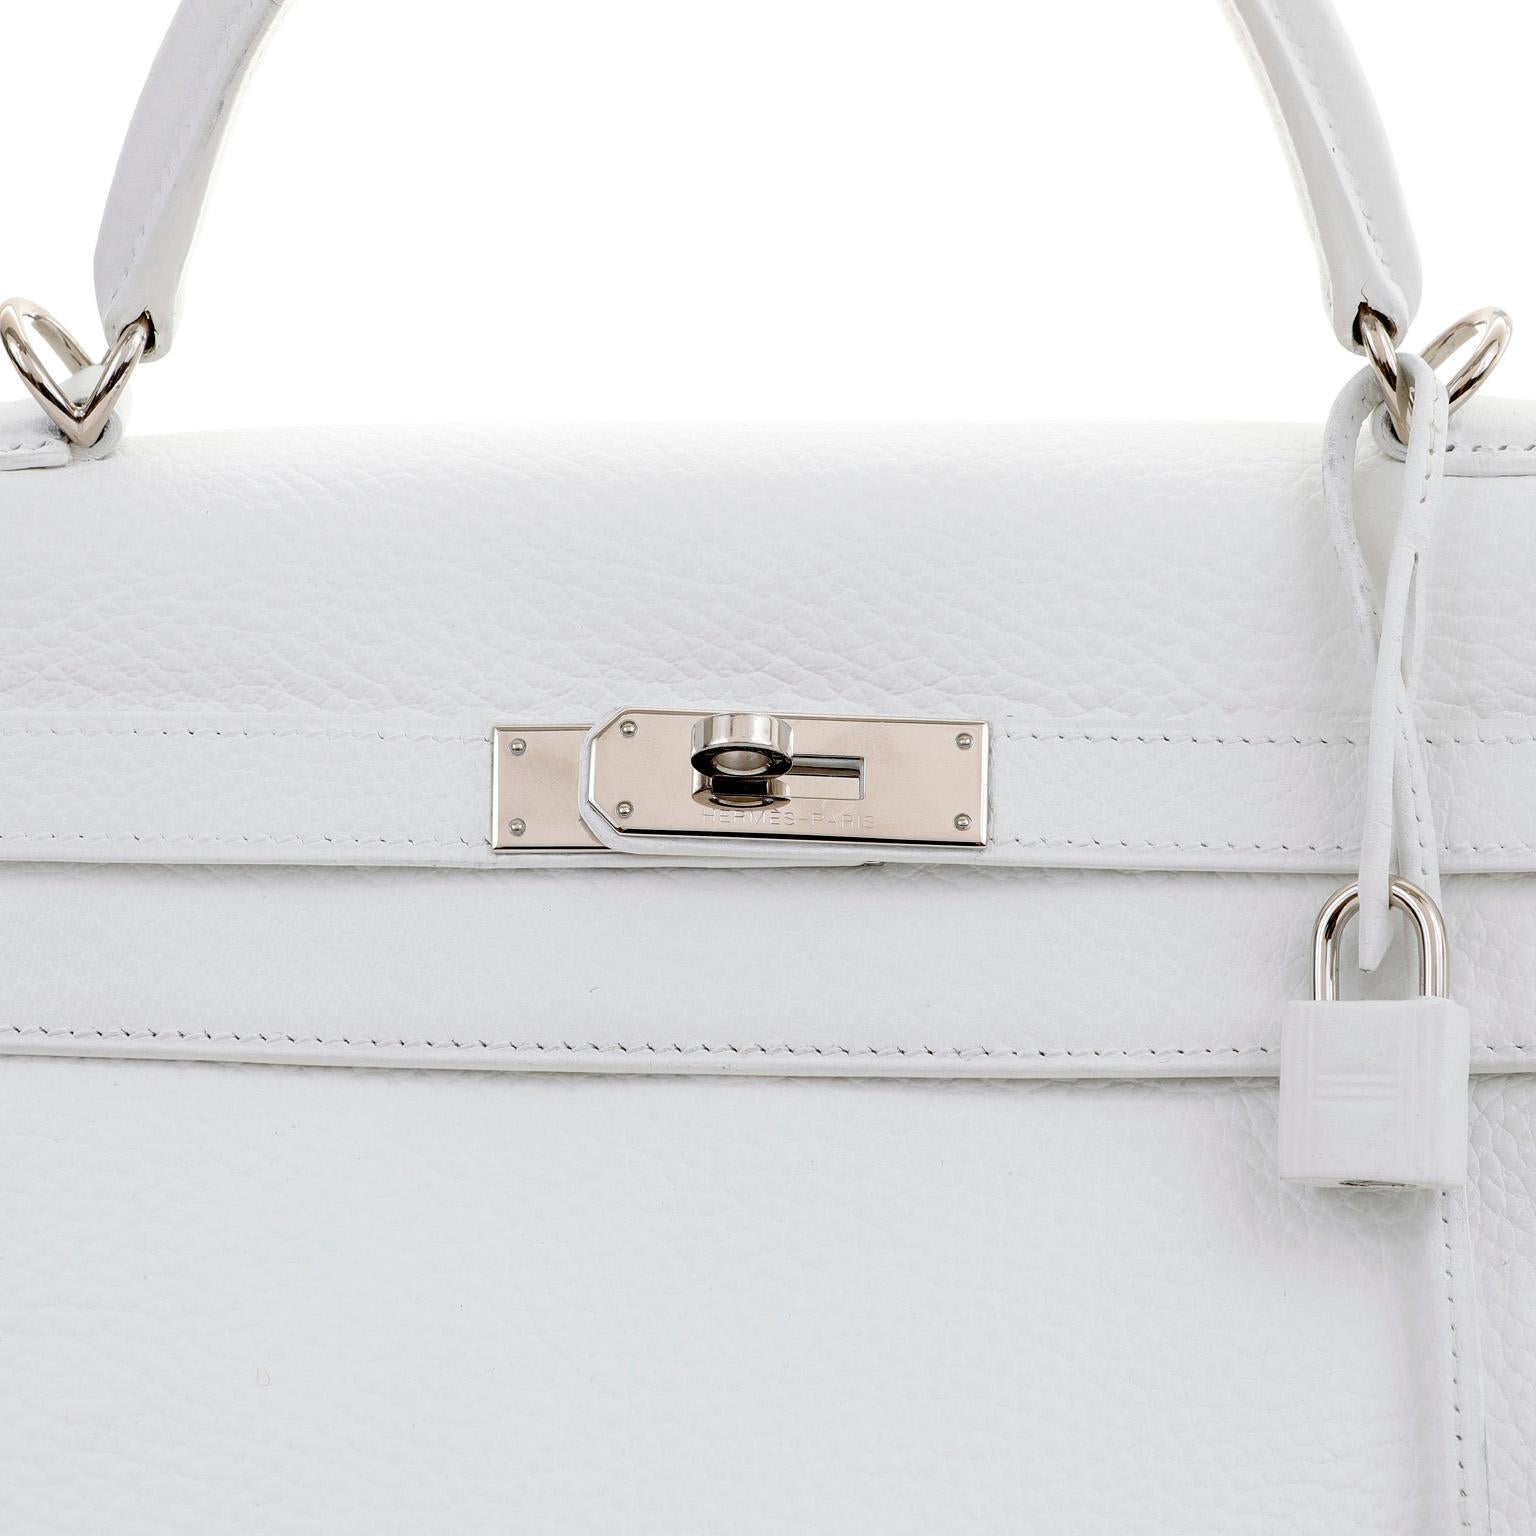 This authentic Hermès 32 cm White Togo Leather Kelly Bag is in pristine condition. Hermès bags are considered the ultimate luxury item worldwide.  Each piece is handcrafted with waitlists that can exceed a year or more. The streamlined and demure